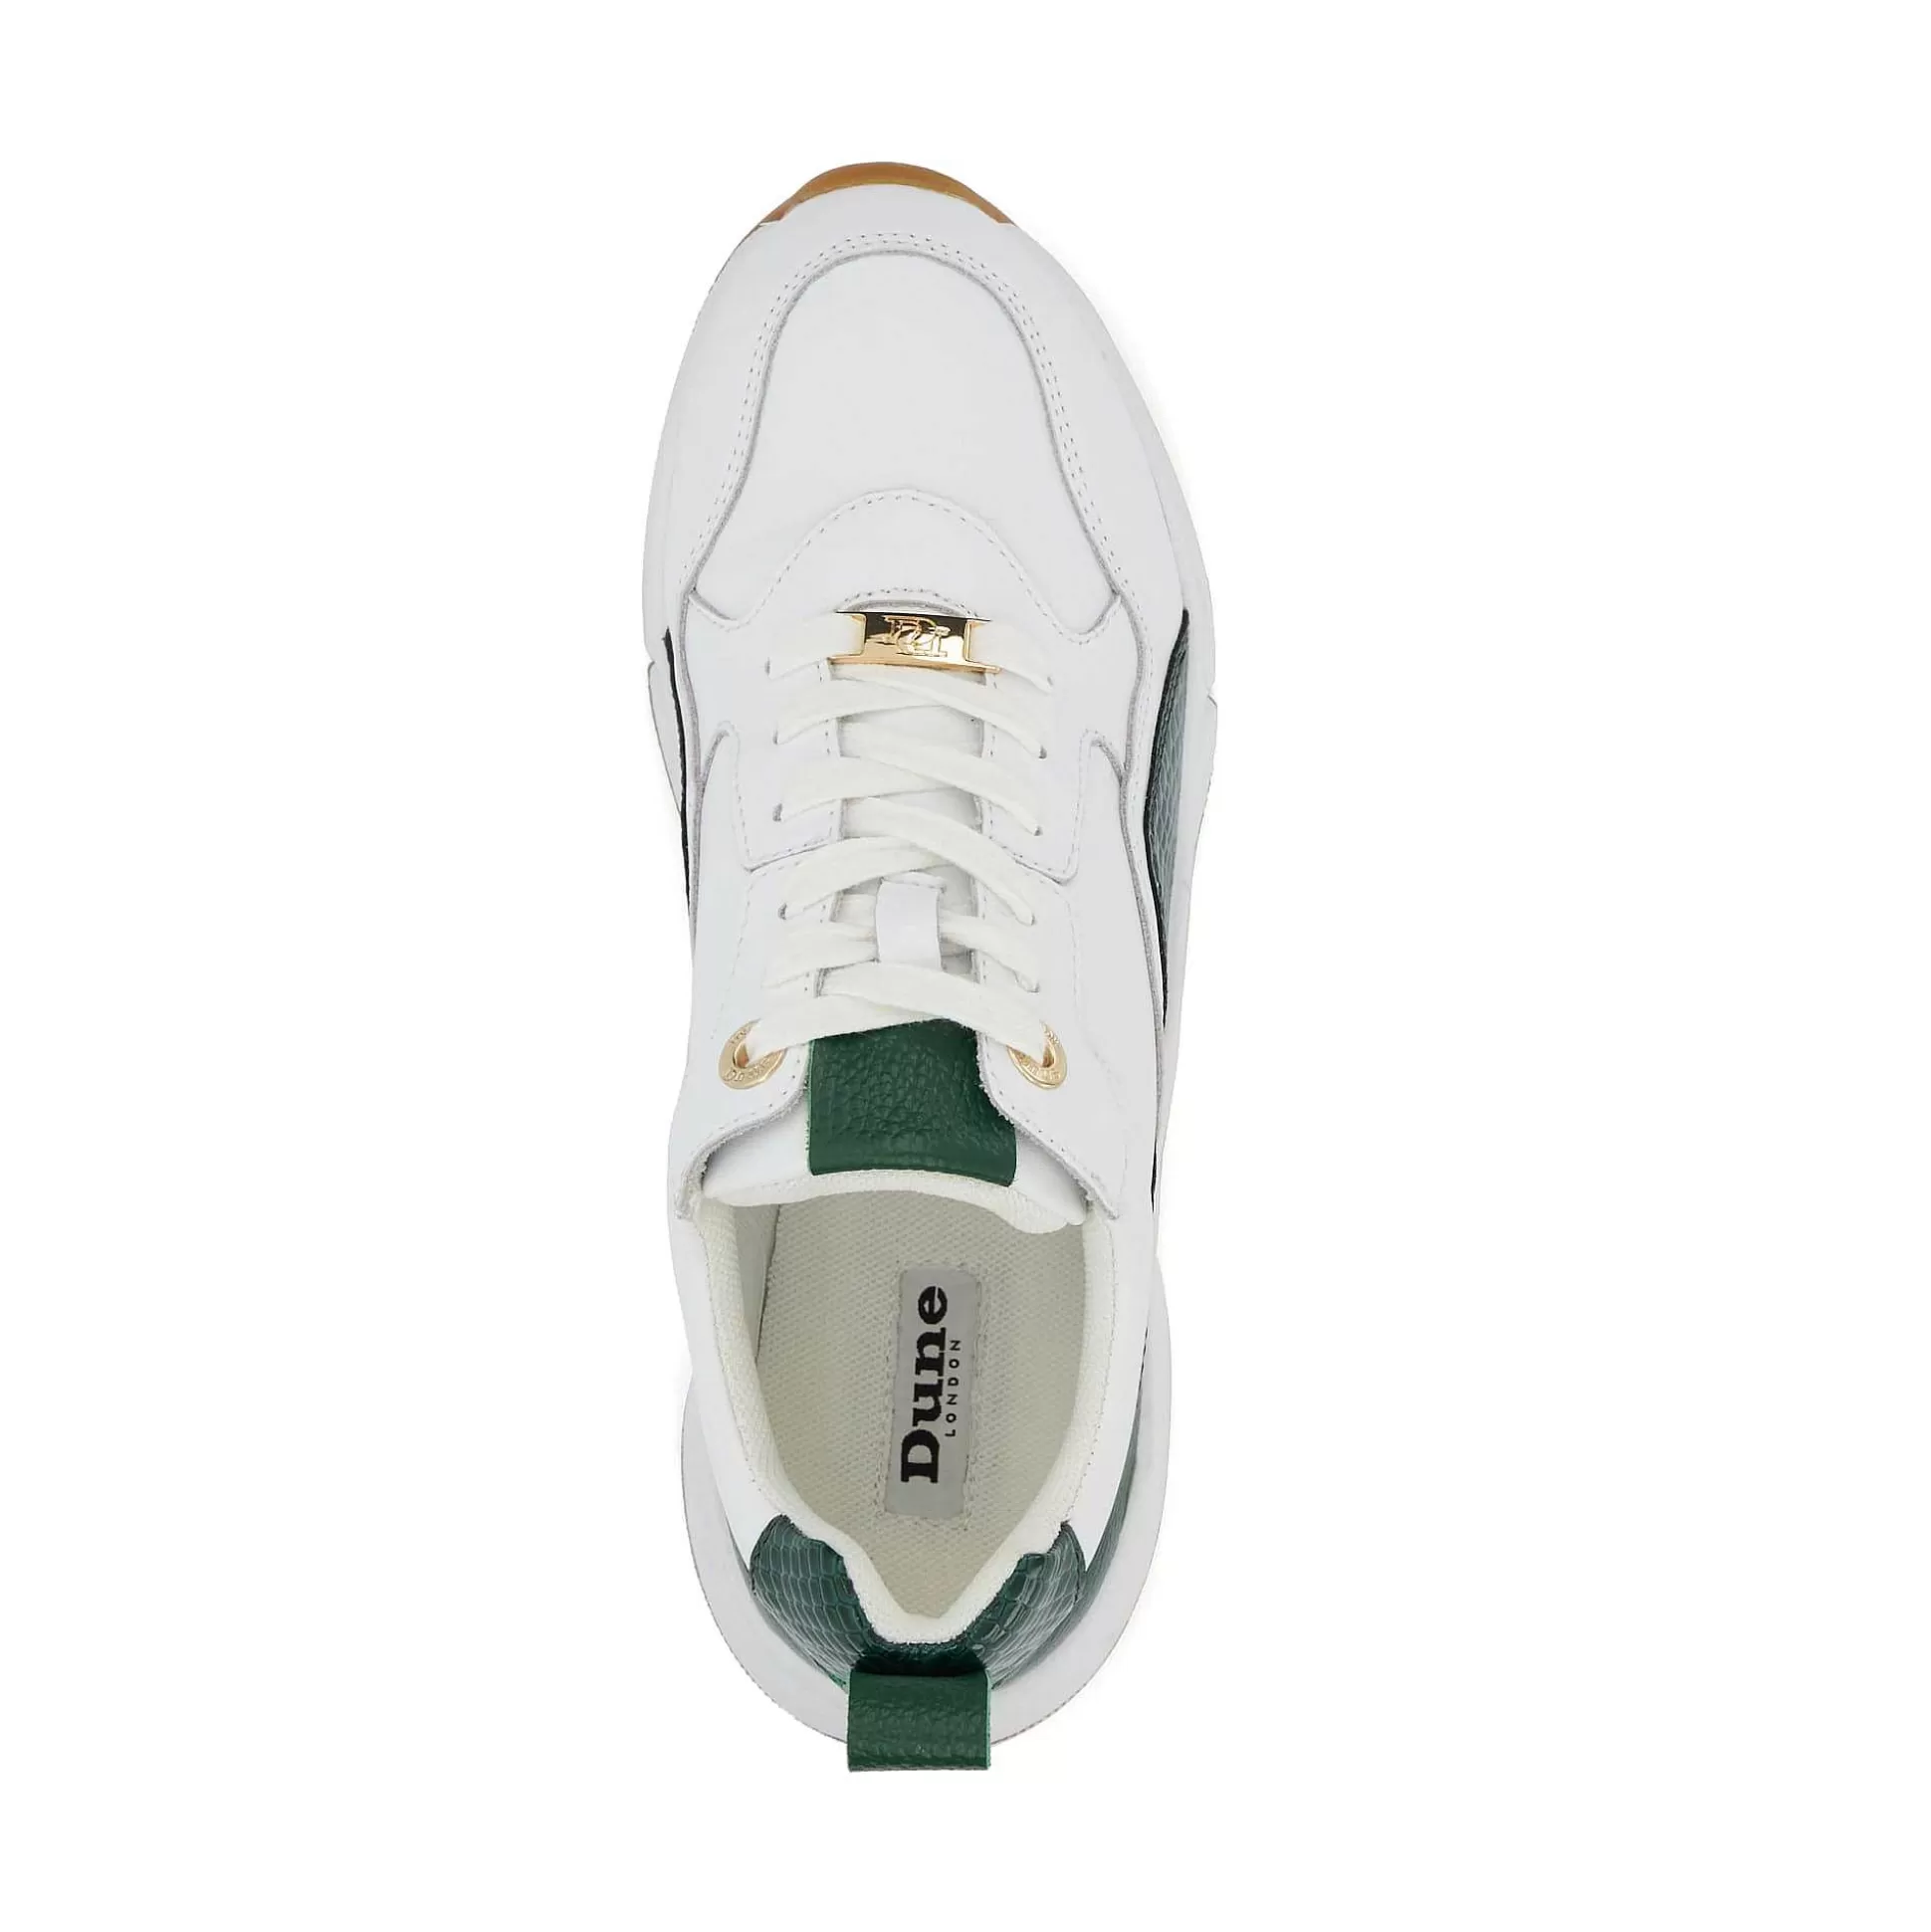 Dune London EAGERLY - GREEN-Women Flat Shoes | Trainers